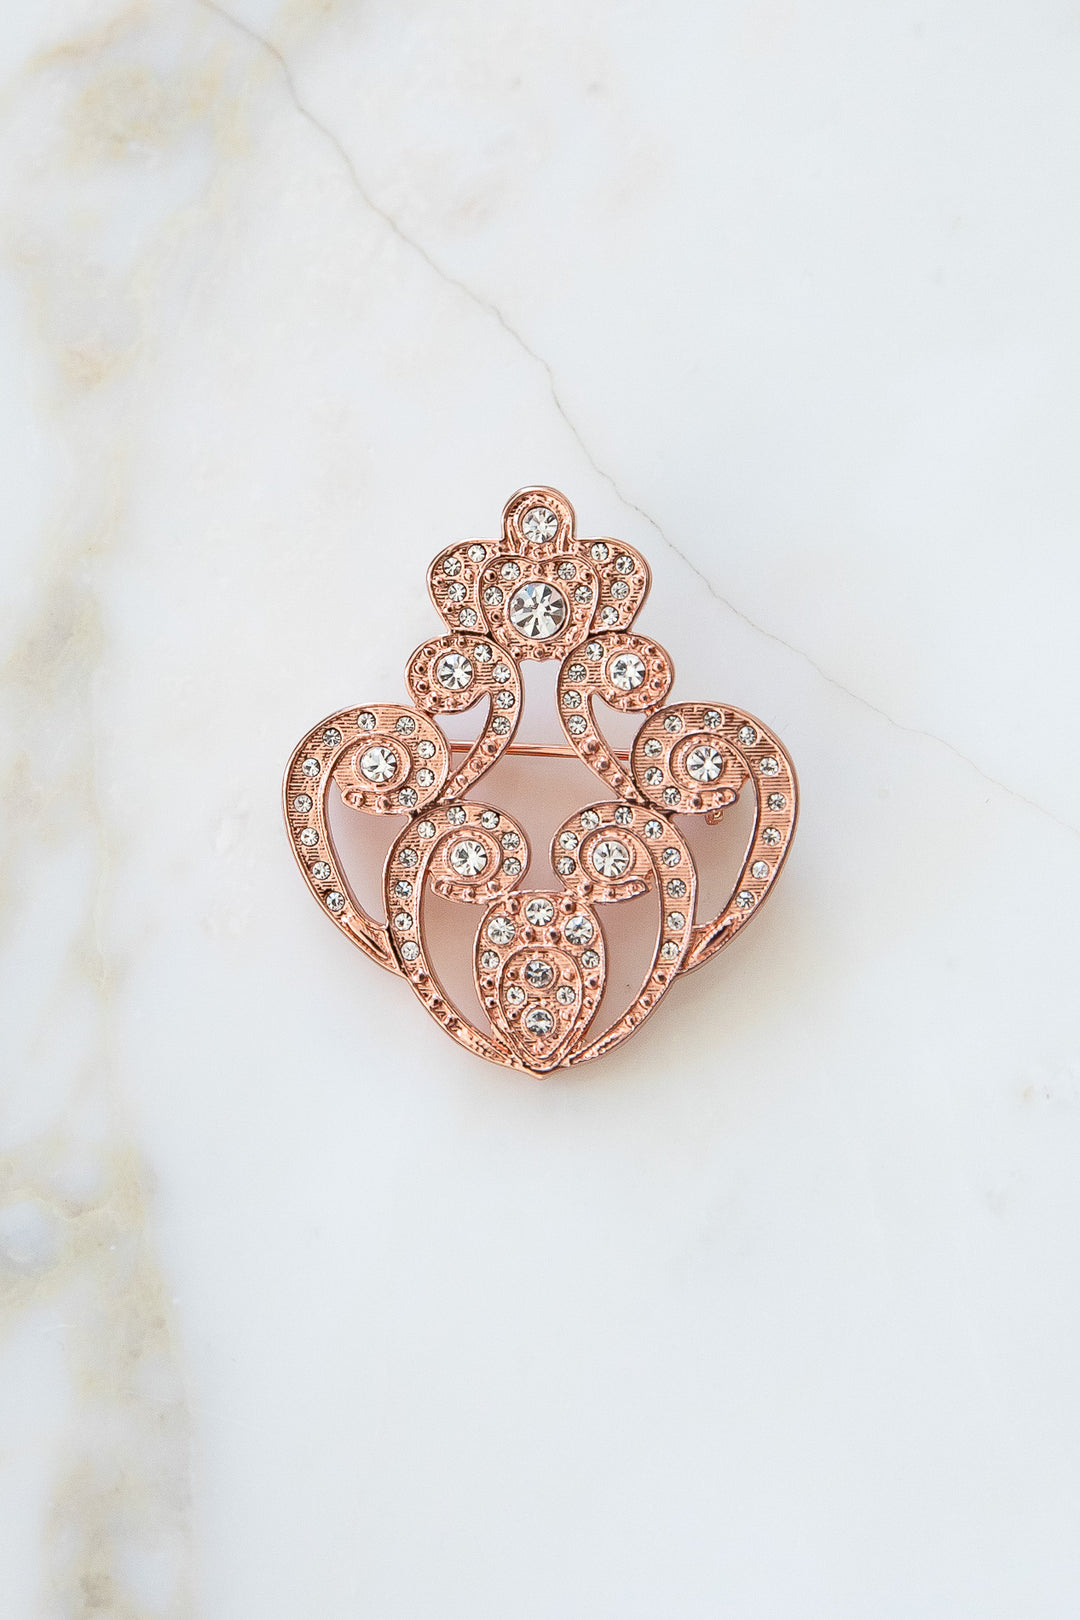 The Crown Brooch - Rose - Gold With White Crystals